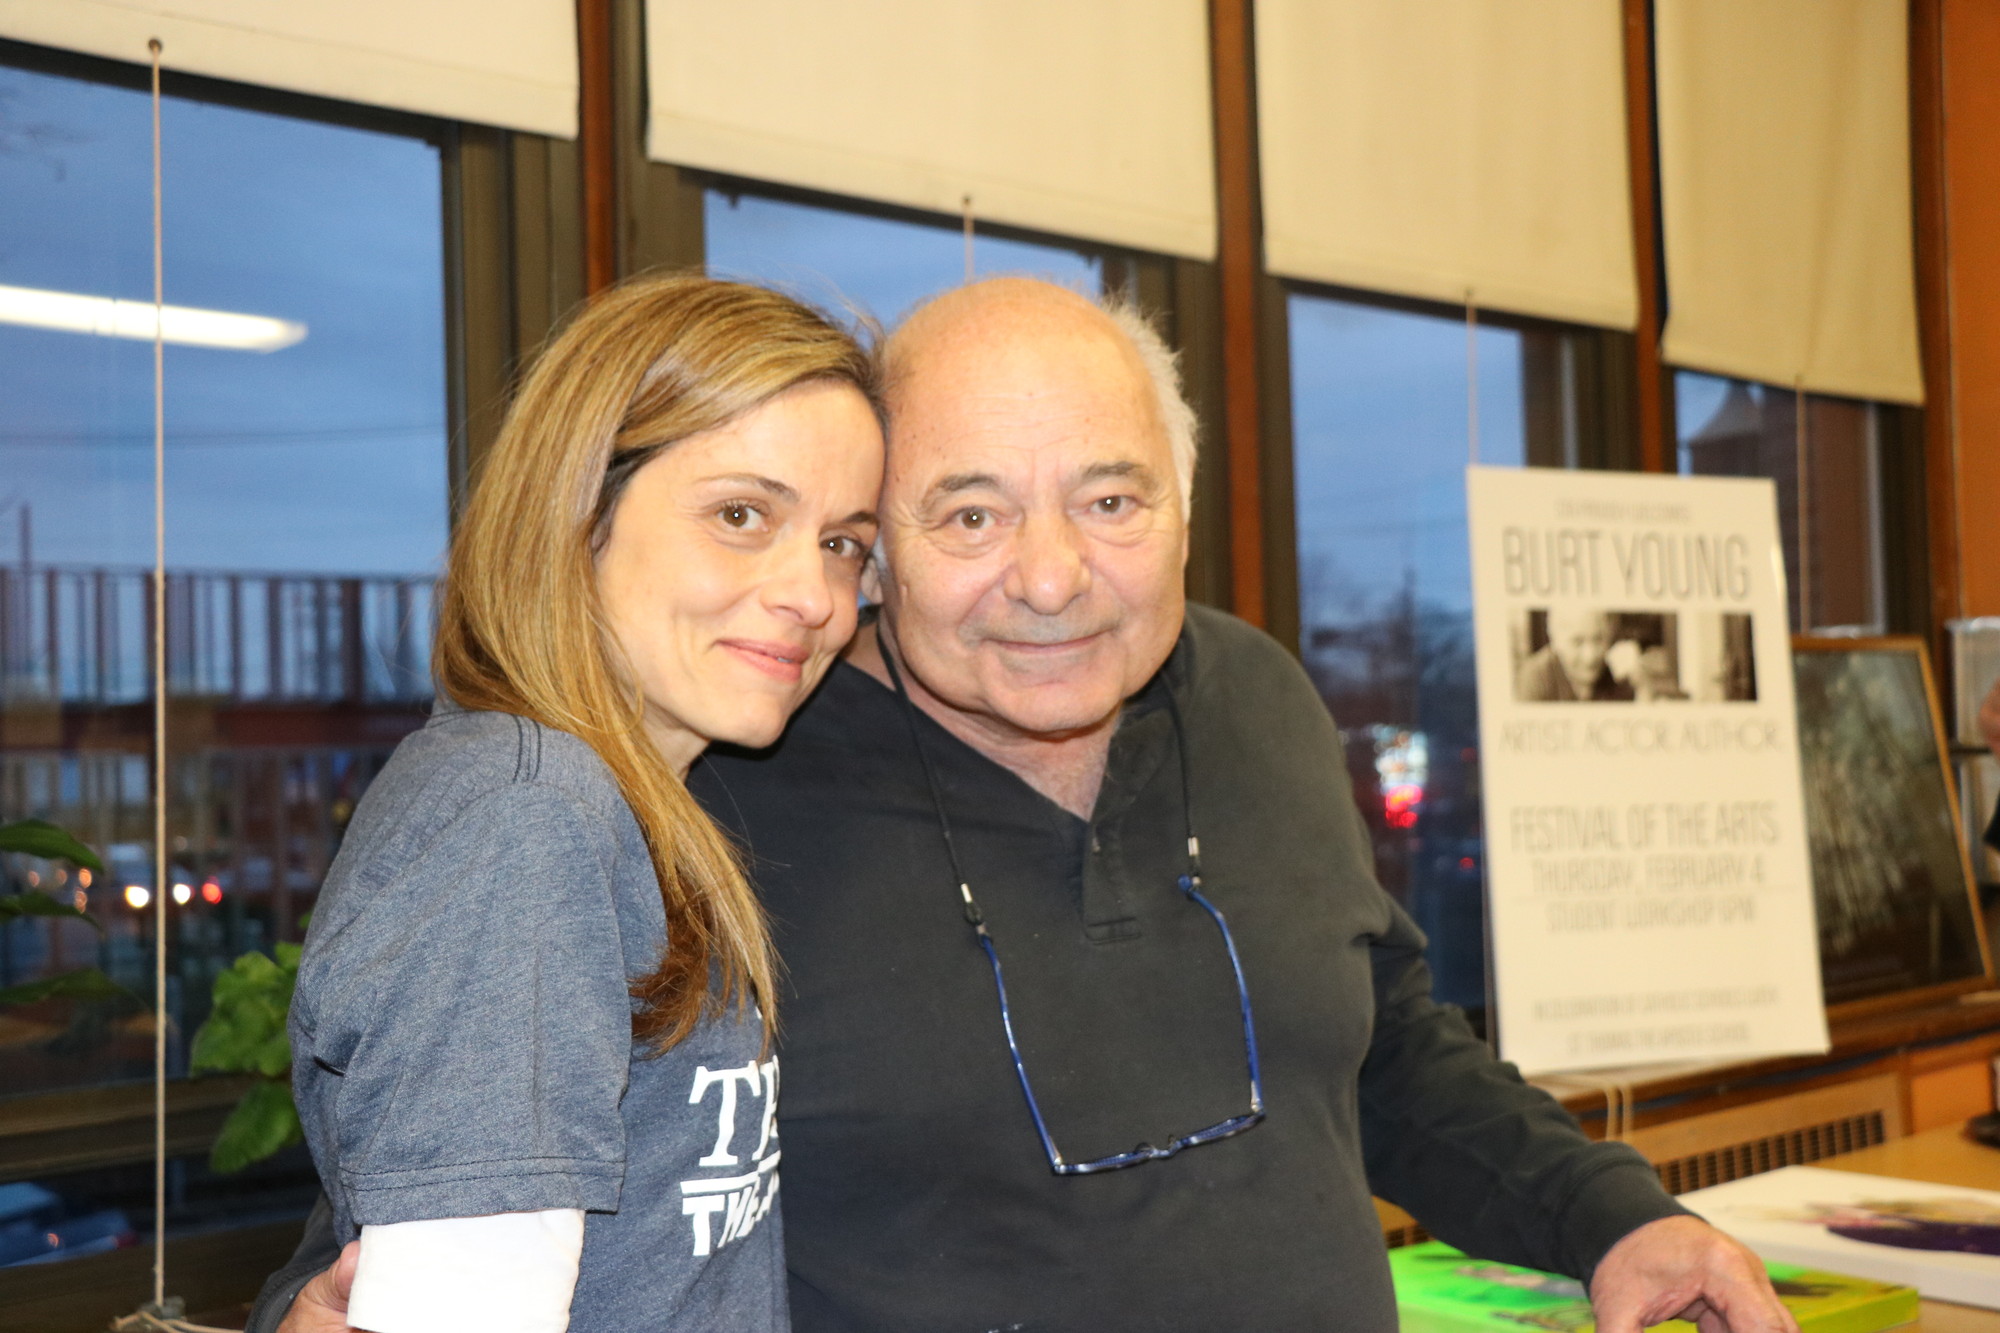 Actor Burt Young with St. Thomas the Apostle teacher Daniela Picone at a painting event at the school Thursday evening.